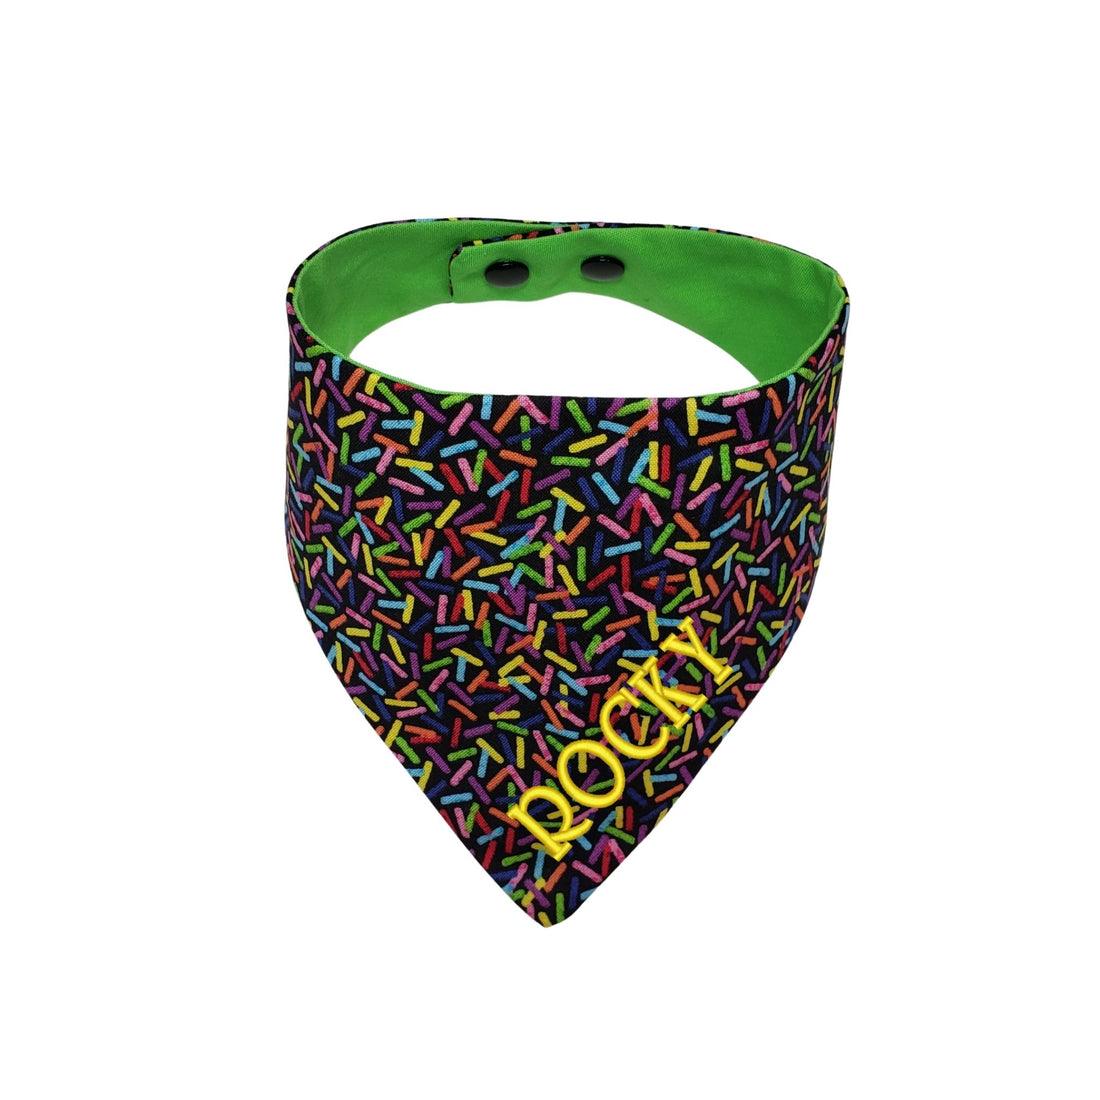 Personalized Birthday Sprinkles embroidered reversible dog bandana - Life Has Just Begun